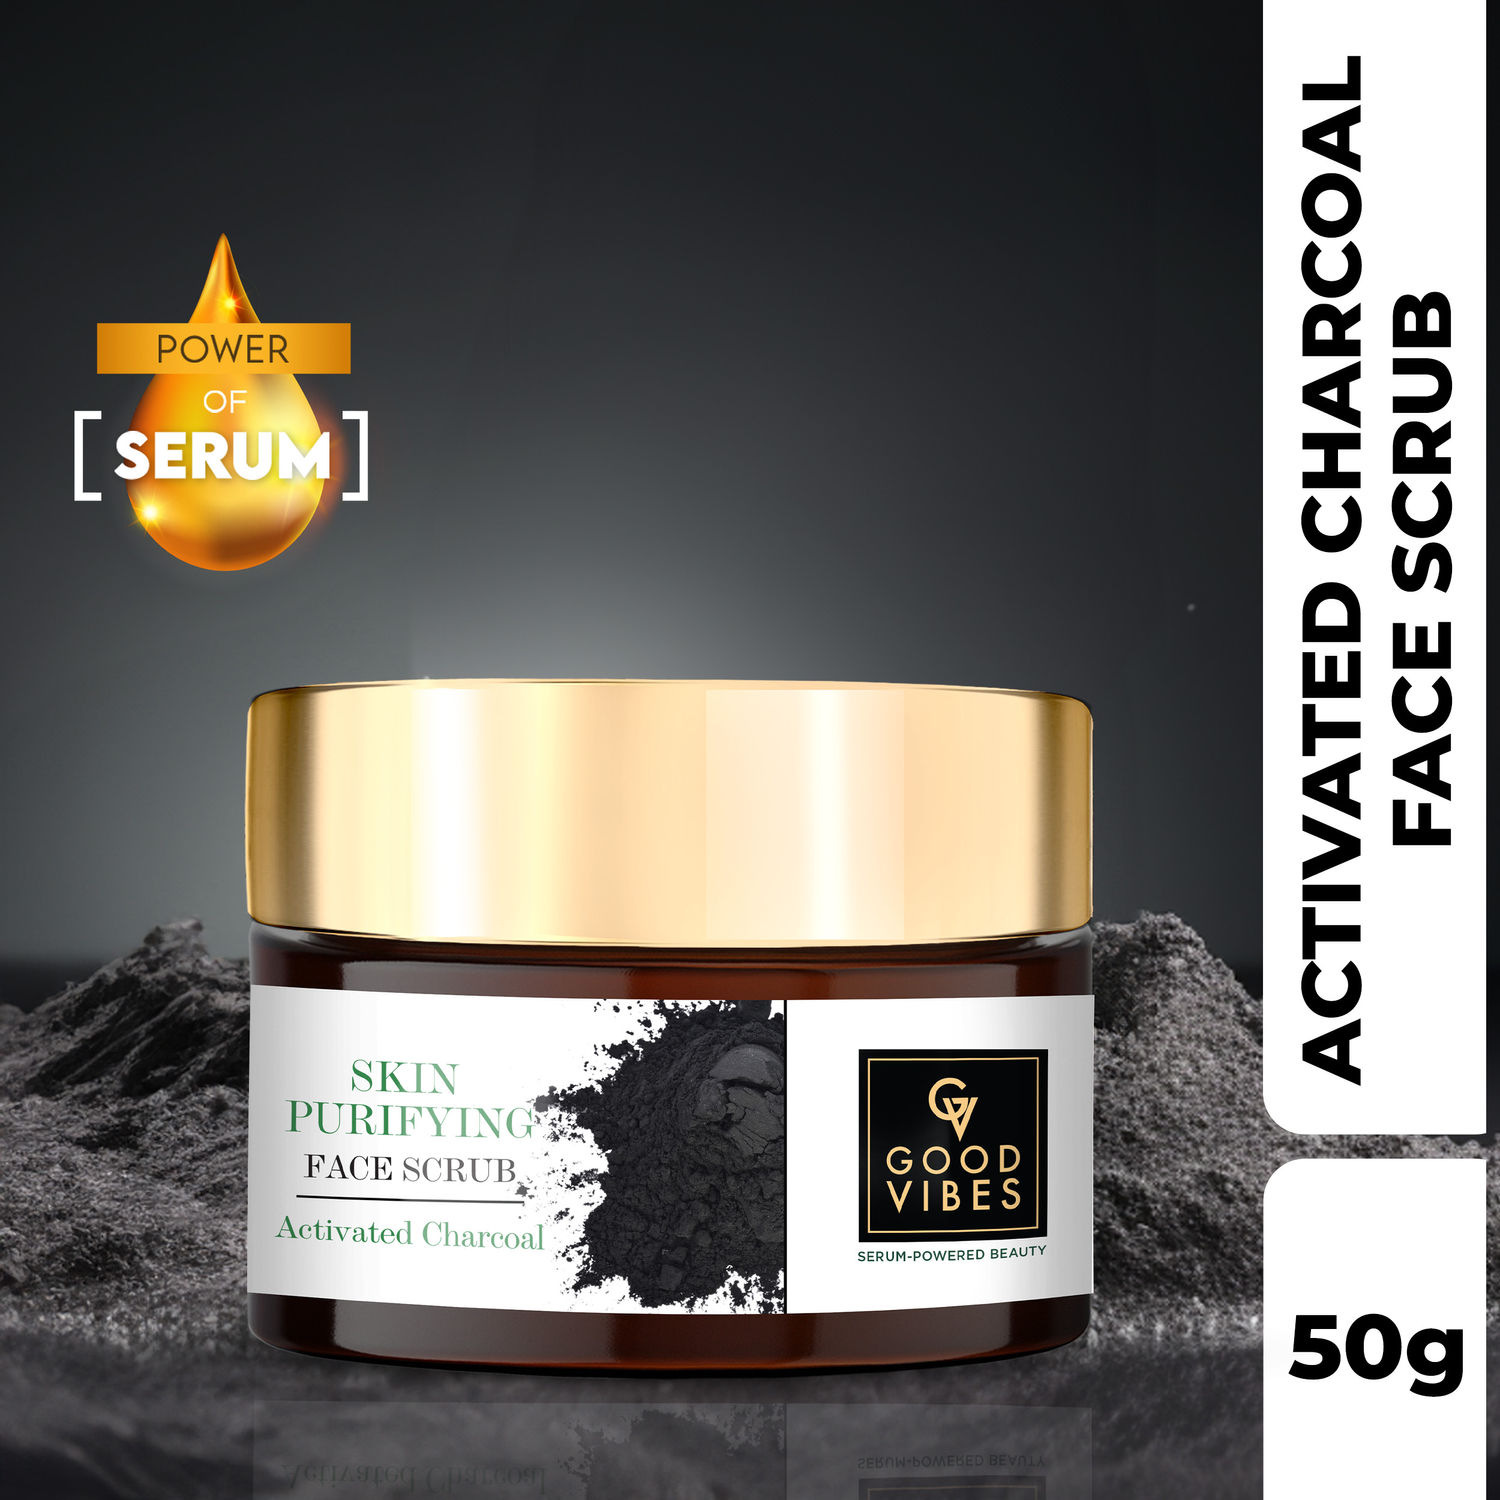 Buy Good Vibes Activated Charcoal Skin Purifying Face Scrub With Power Of Serum (50g) - Purplle